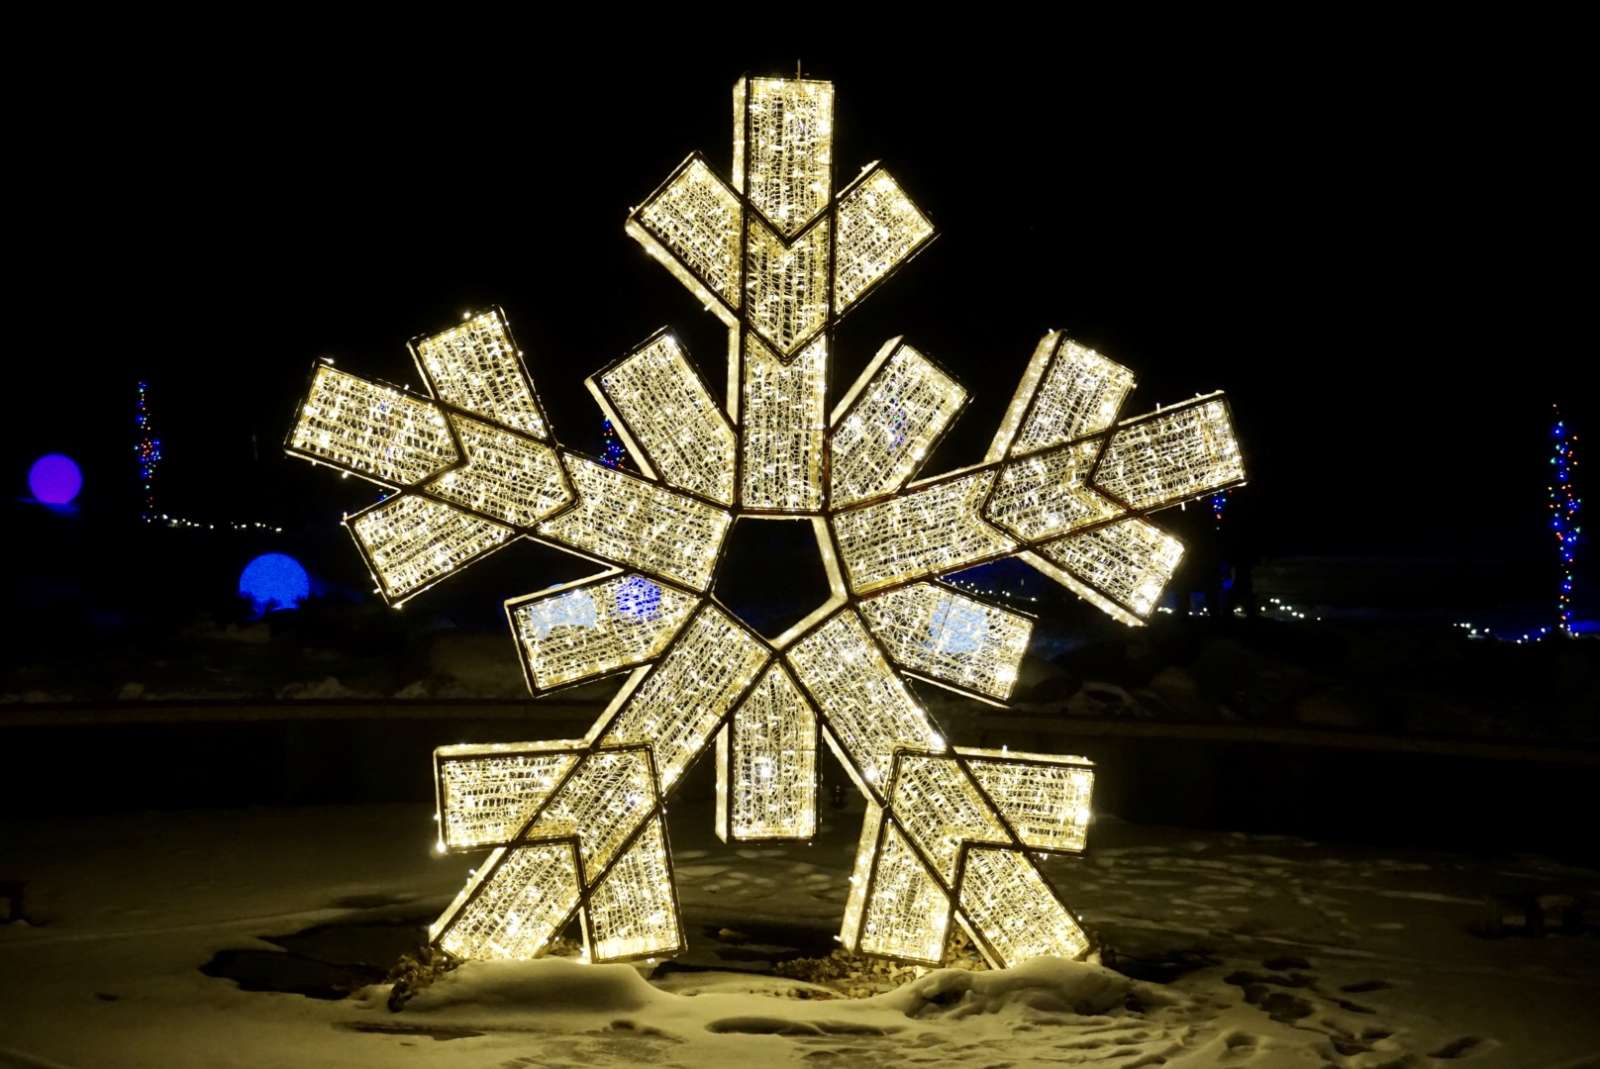 enormous snowflake lit structure shining in the night